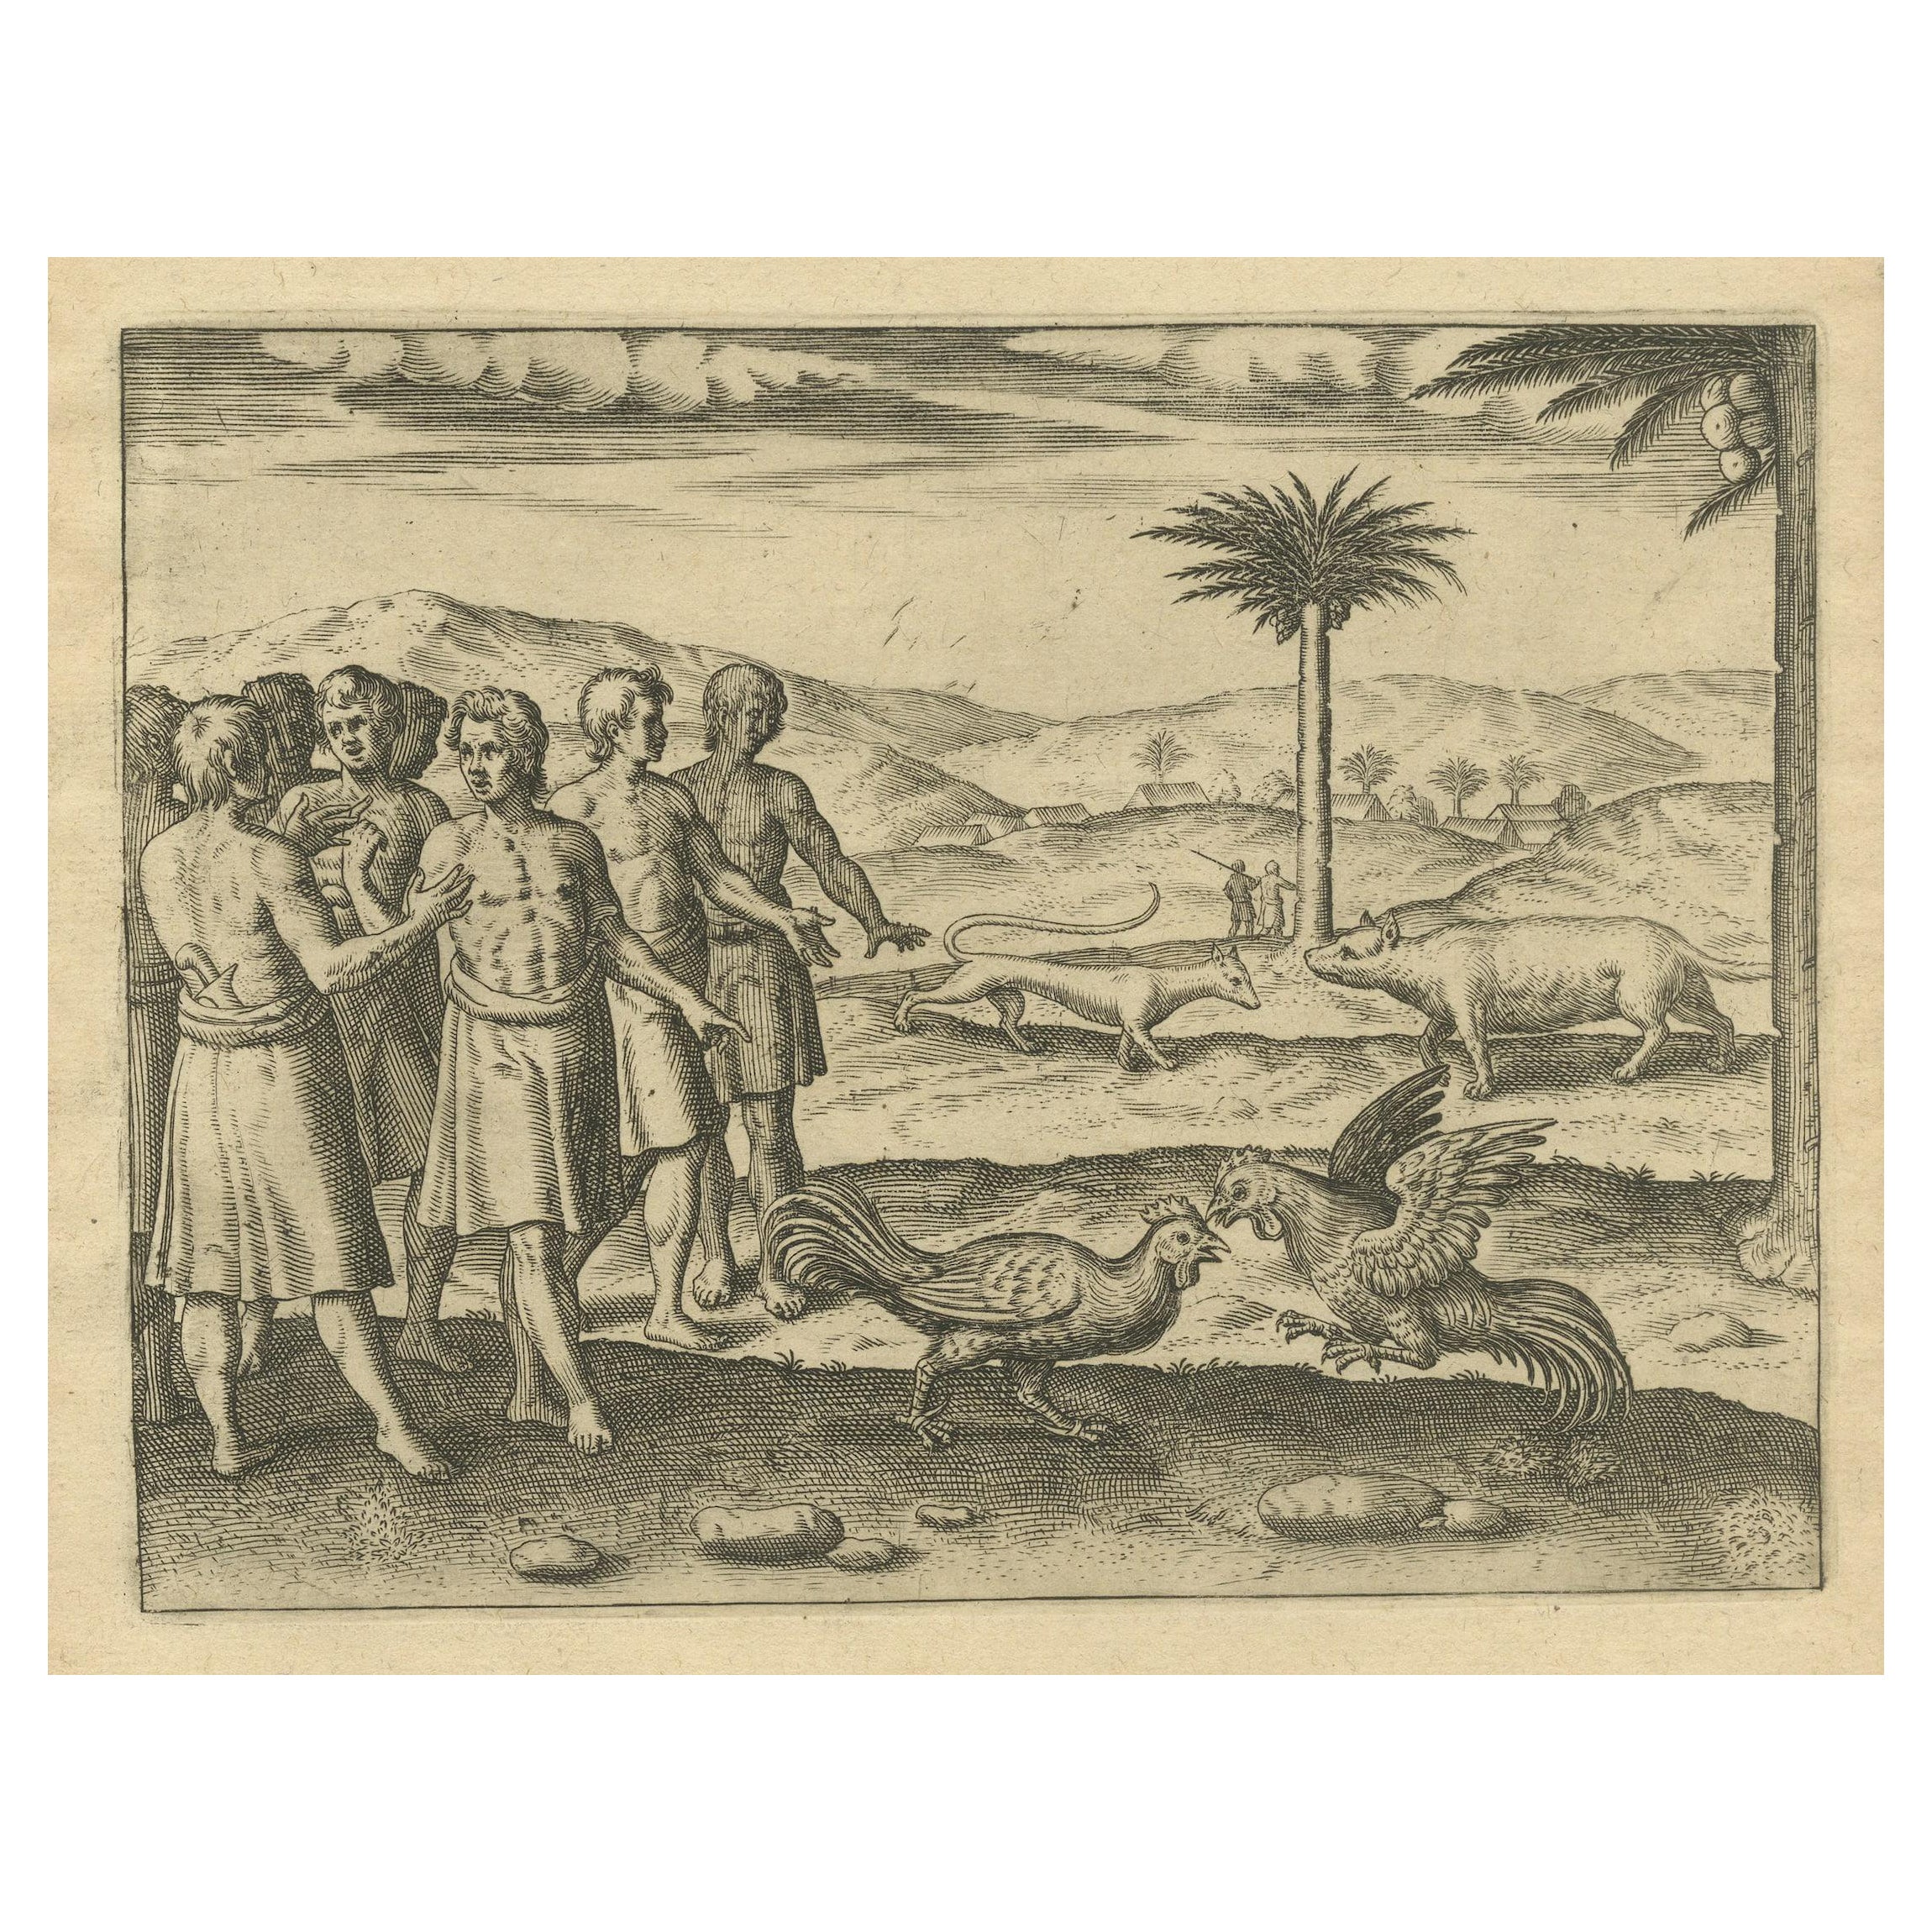 The Cockfight of Java: A 1601 de Bry Engraving of Cultural Pastimes